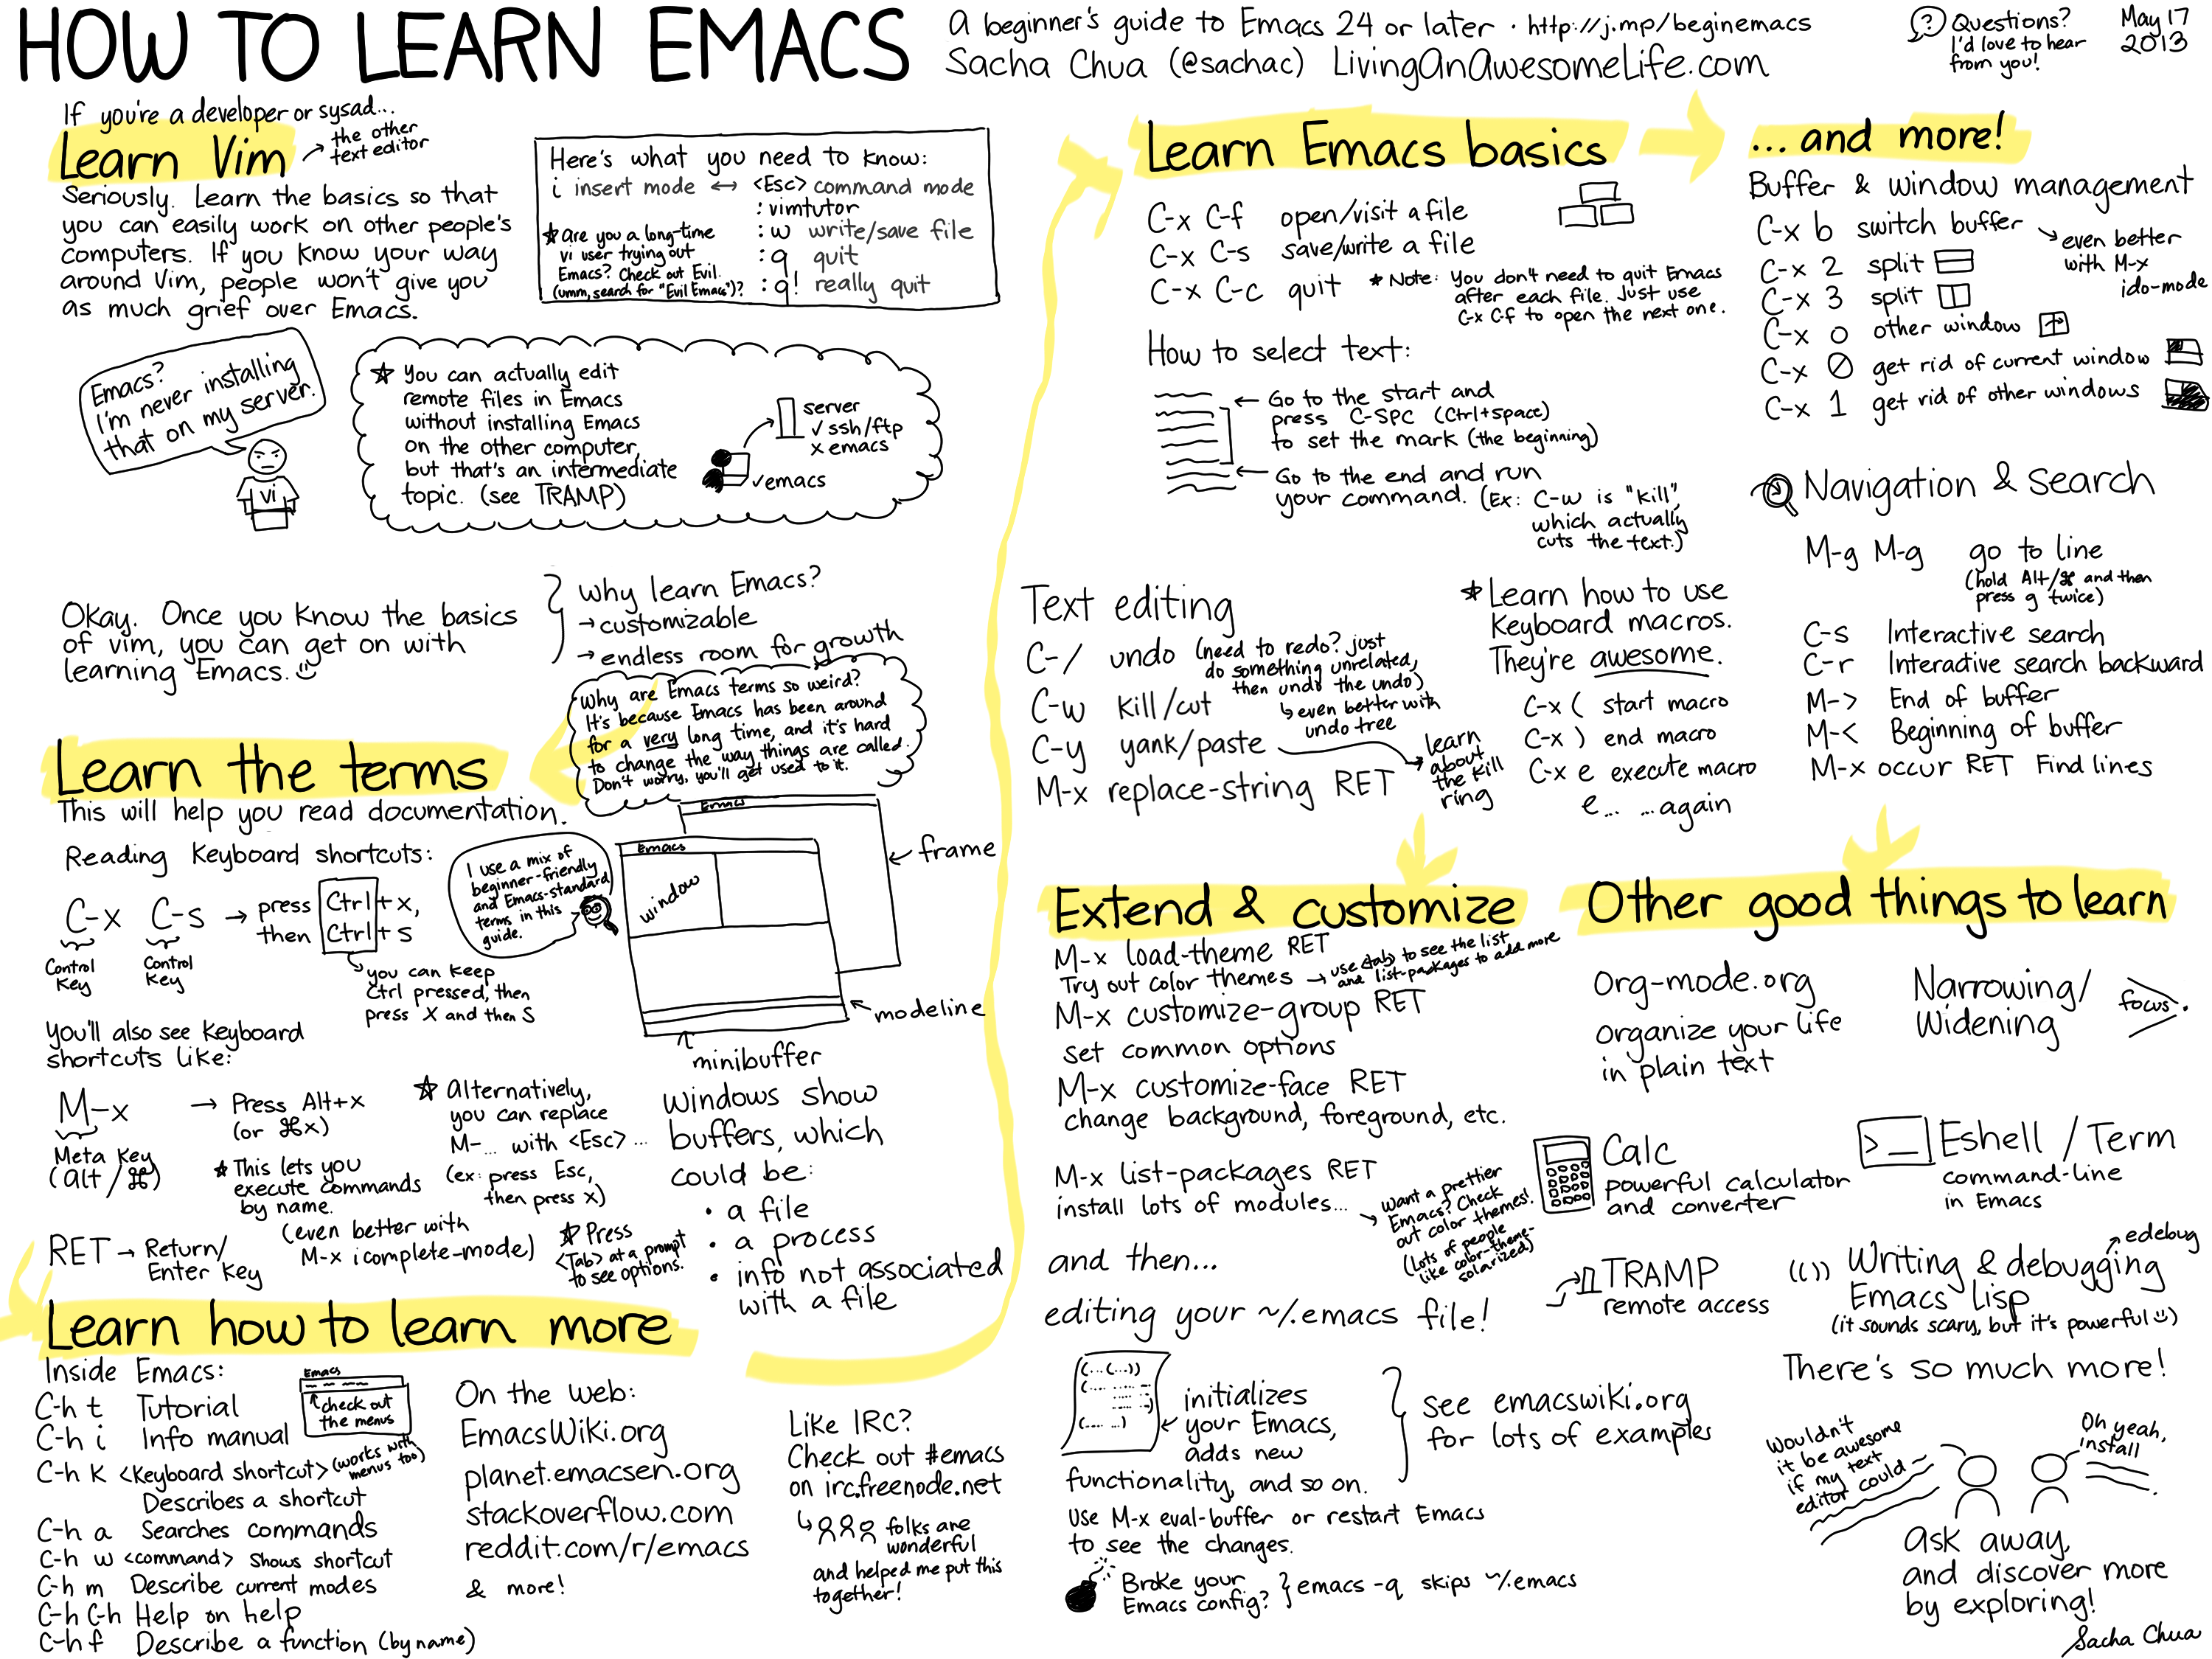 http://sachachua.com/blog/wp-content/uploads/2013/05/How-to-Learn-Emacs8.png